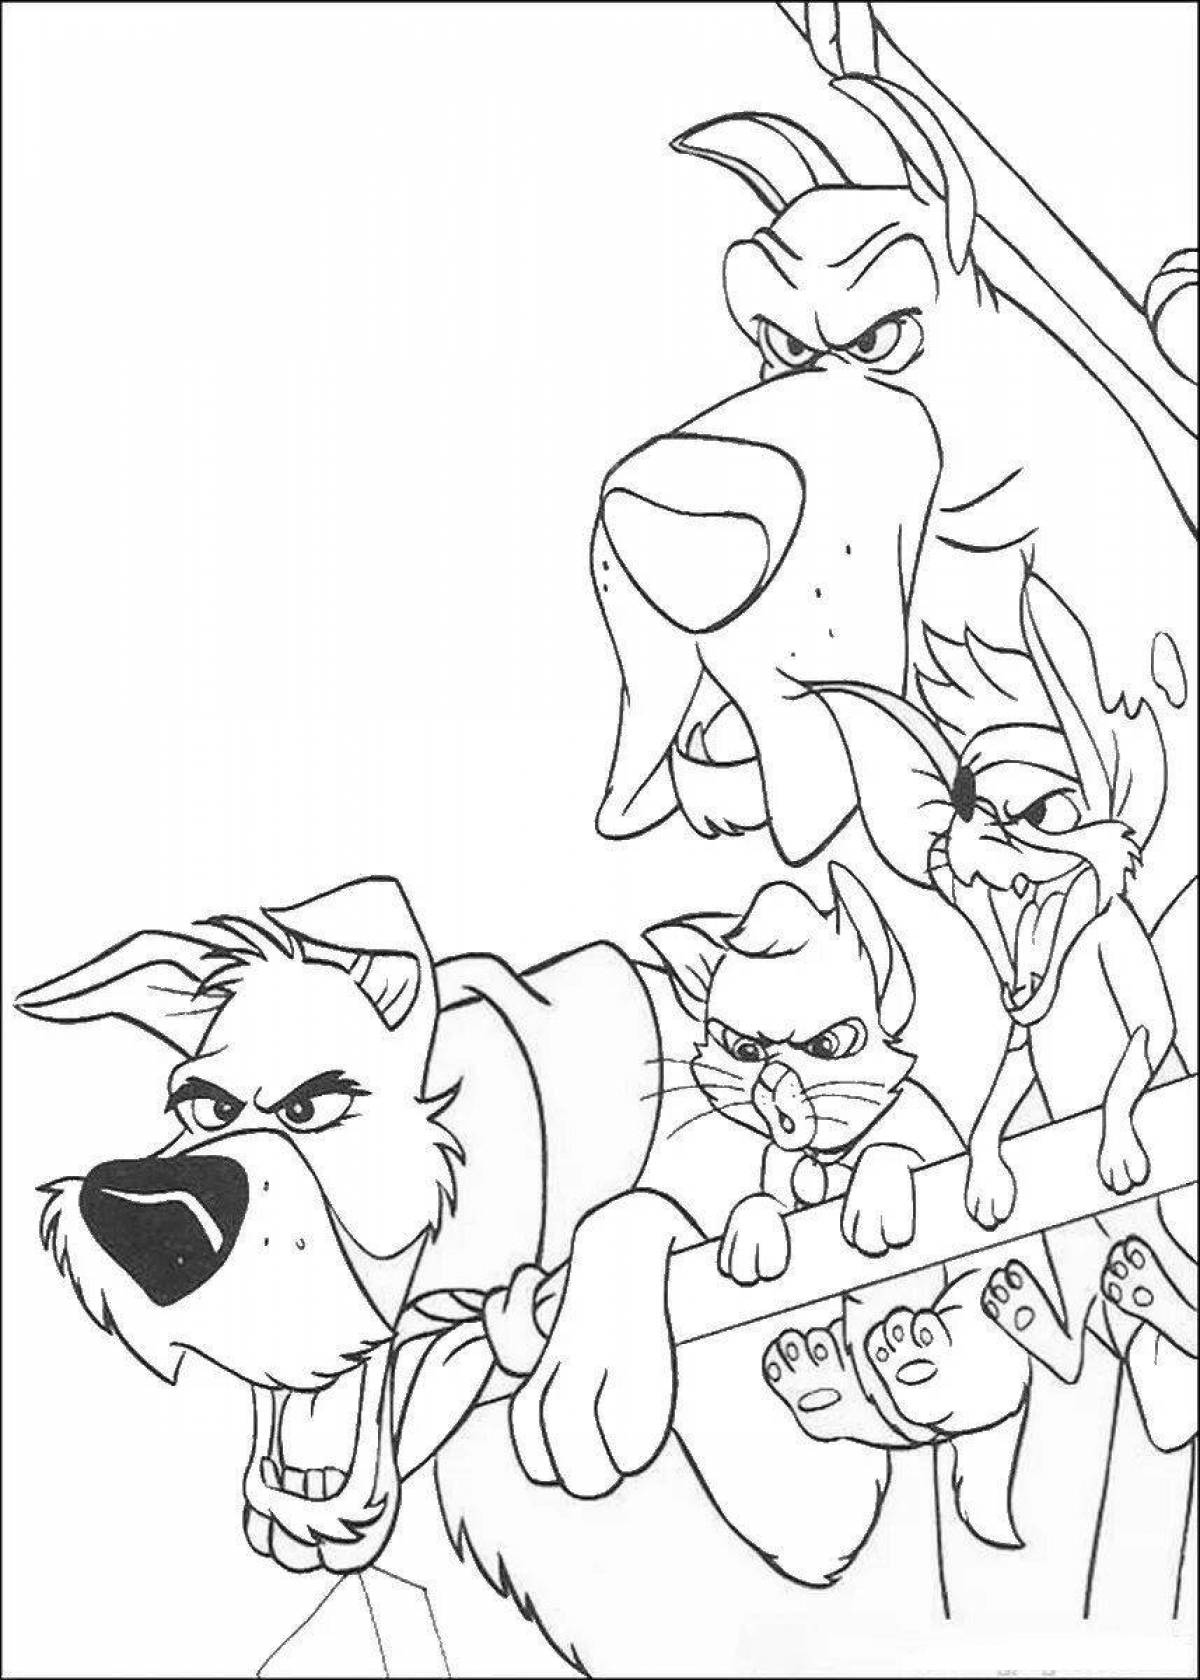 Unique oliver and company coloring